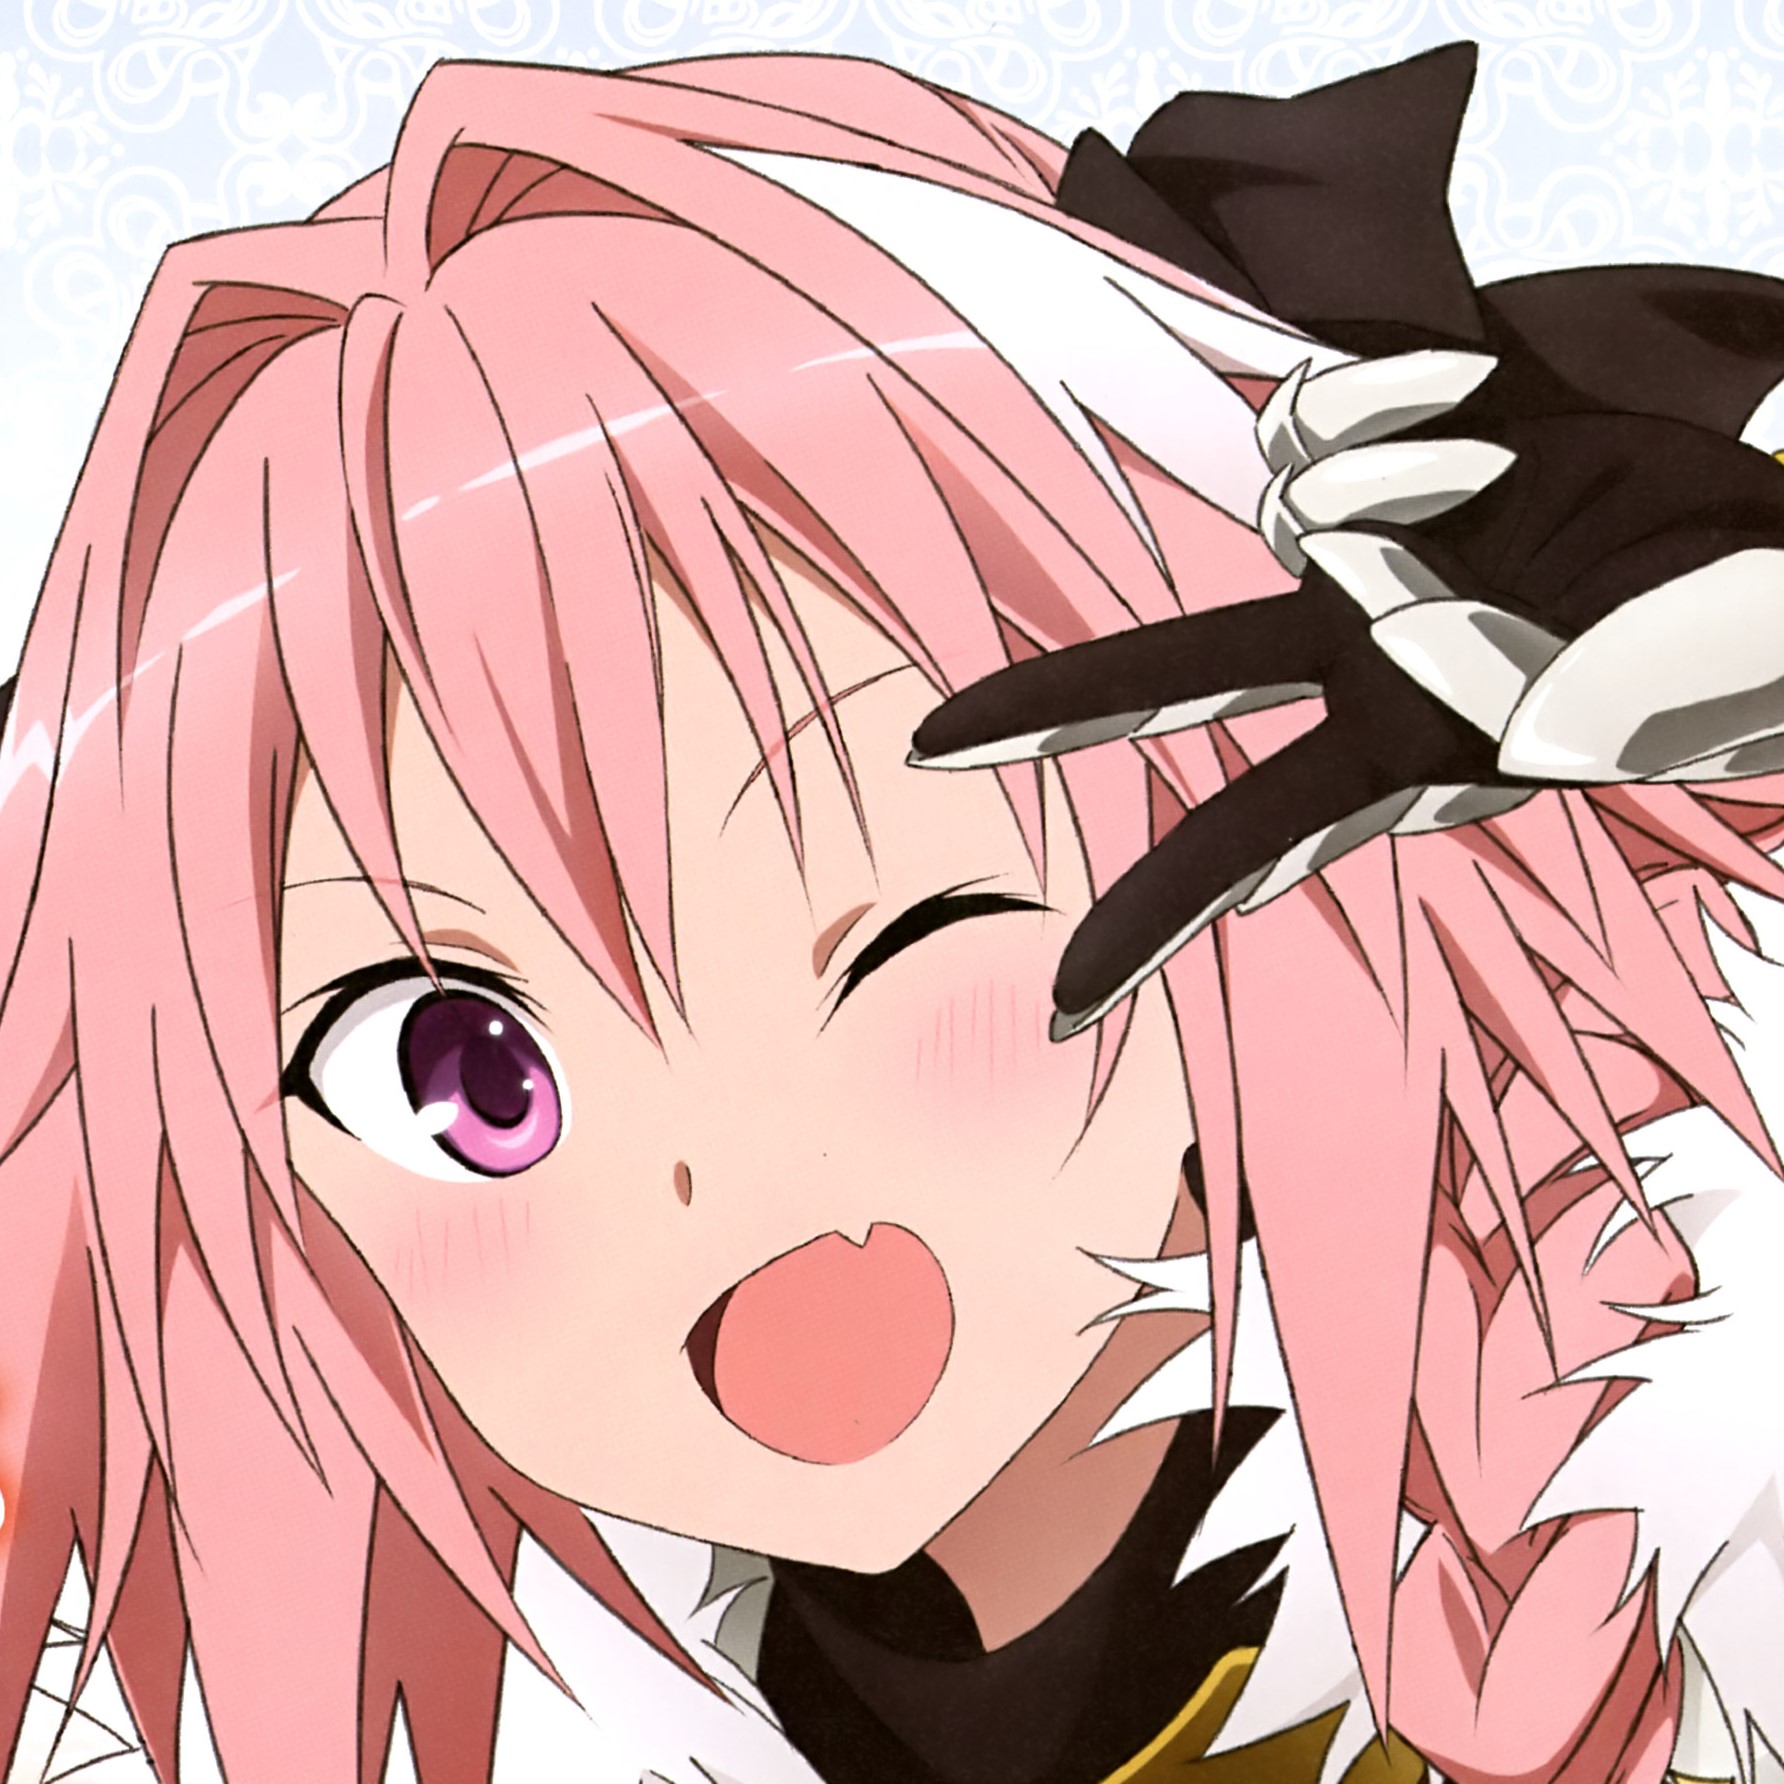 Astolfo from Fate/Apocrypha